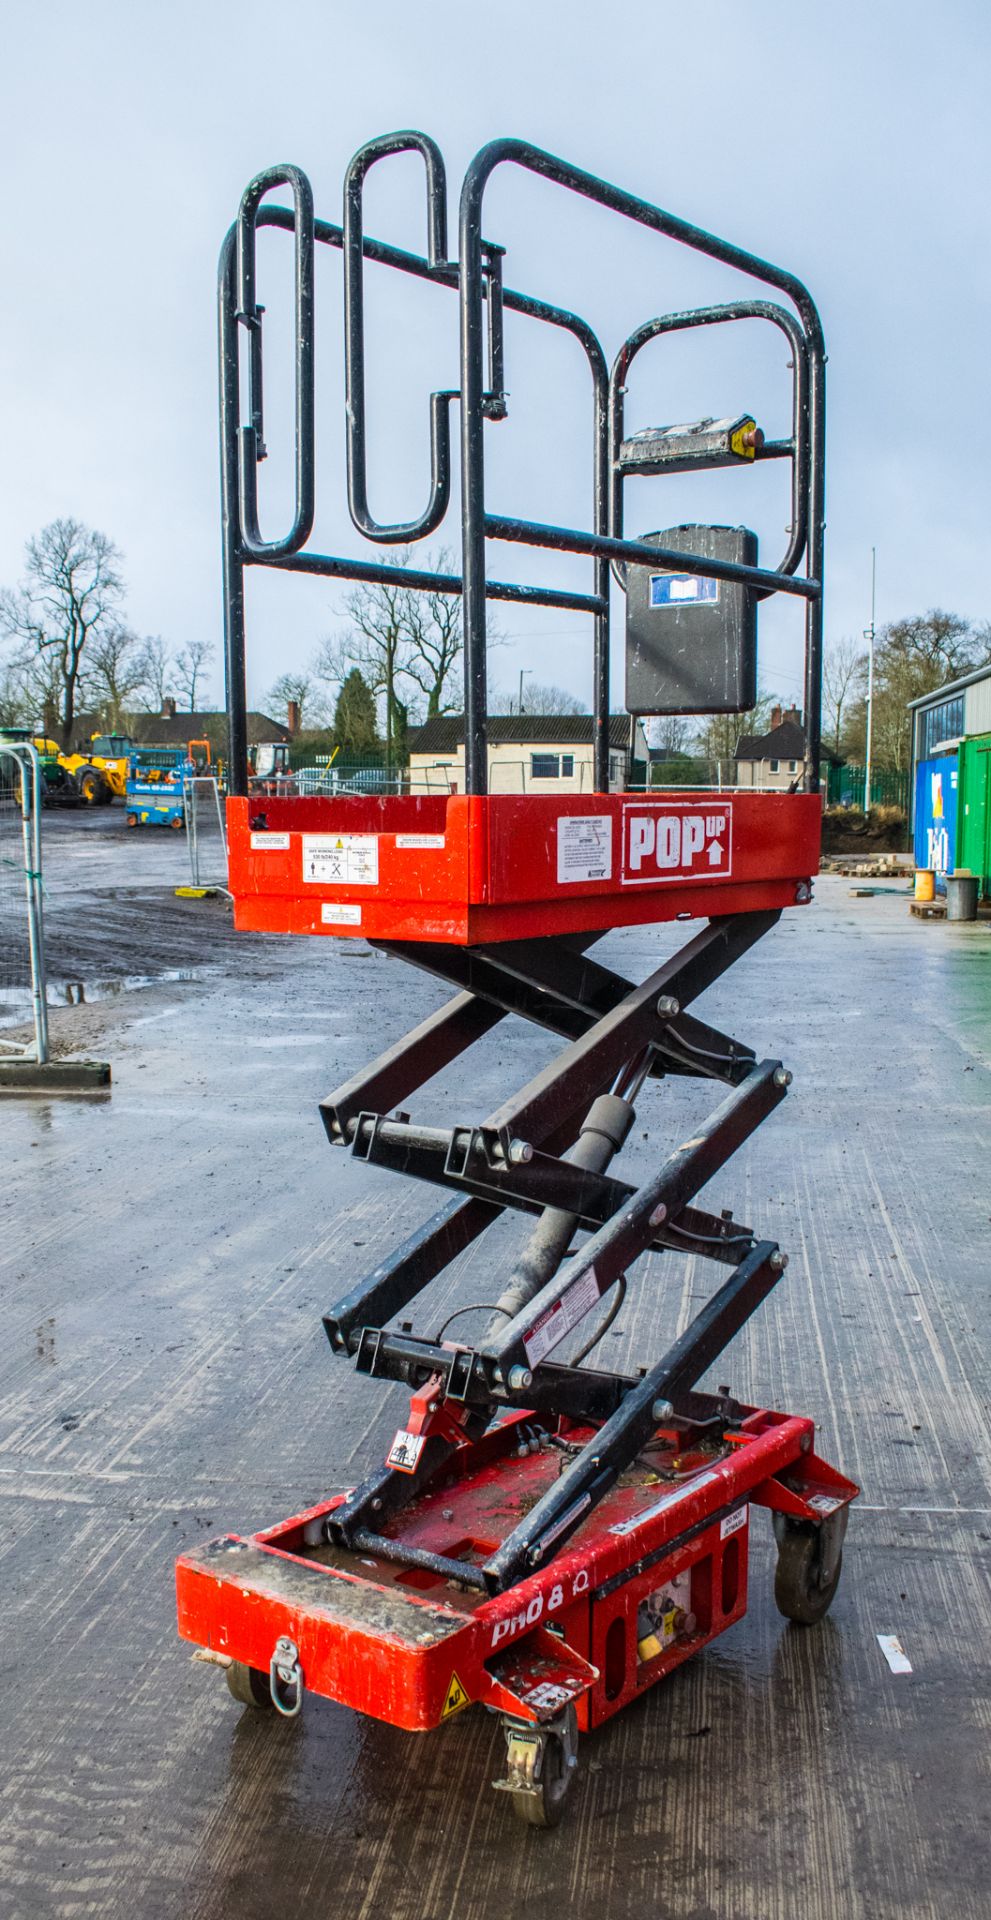 Pop-up PRO 8 iQ battery electric push around scissor lift  Year: 2016 S/N: 01-000924 A740386 - Image 5 of 6